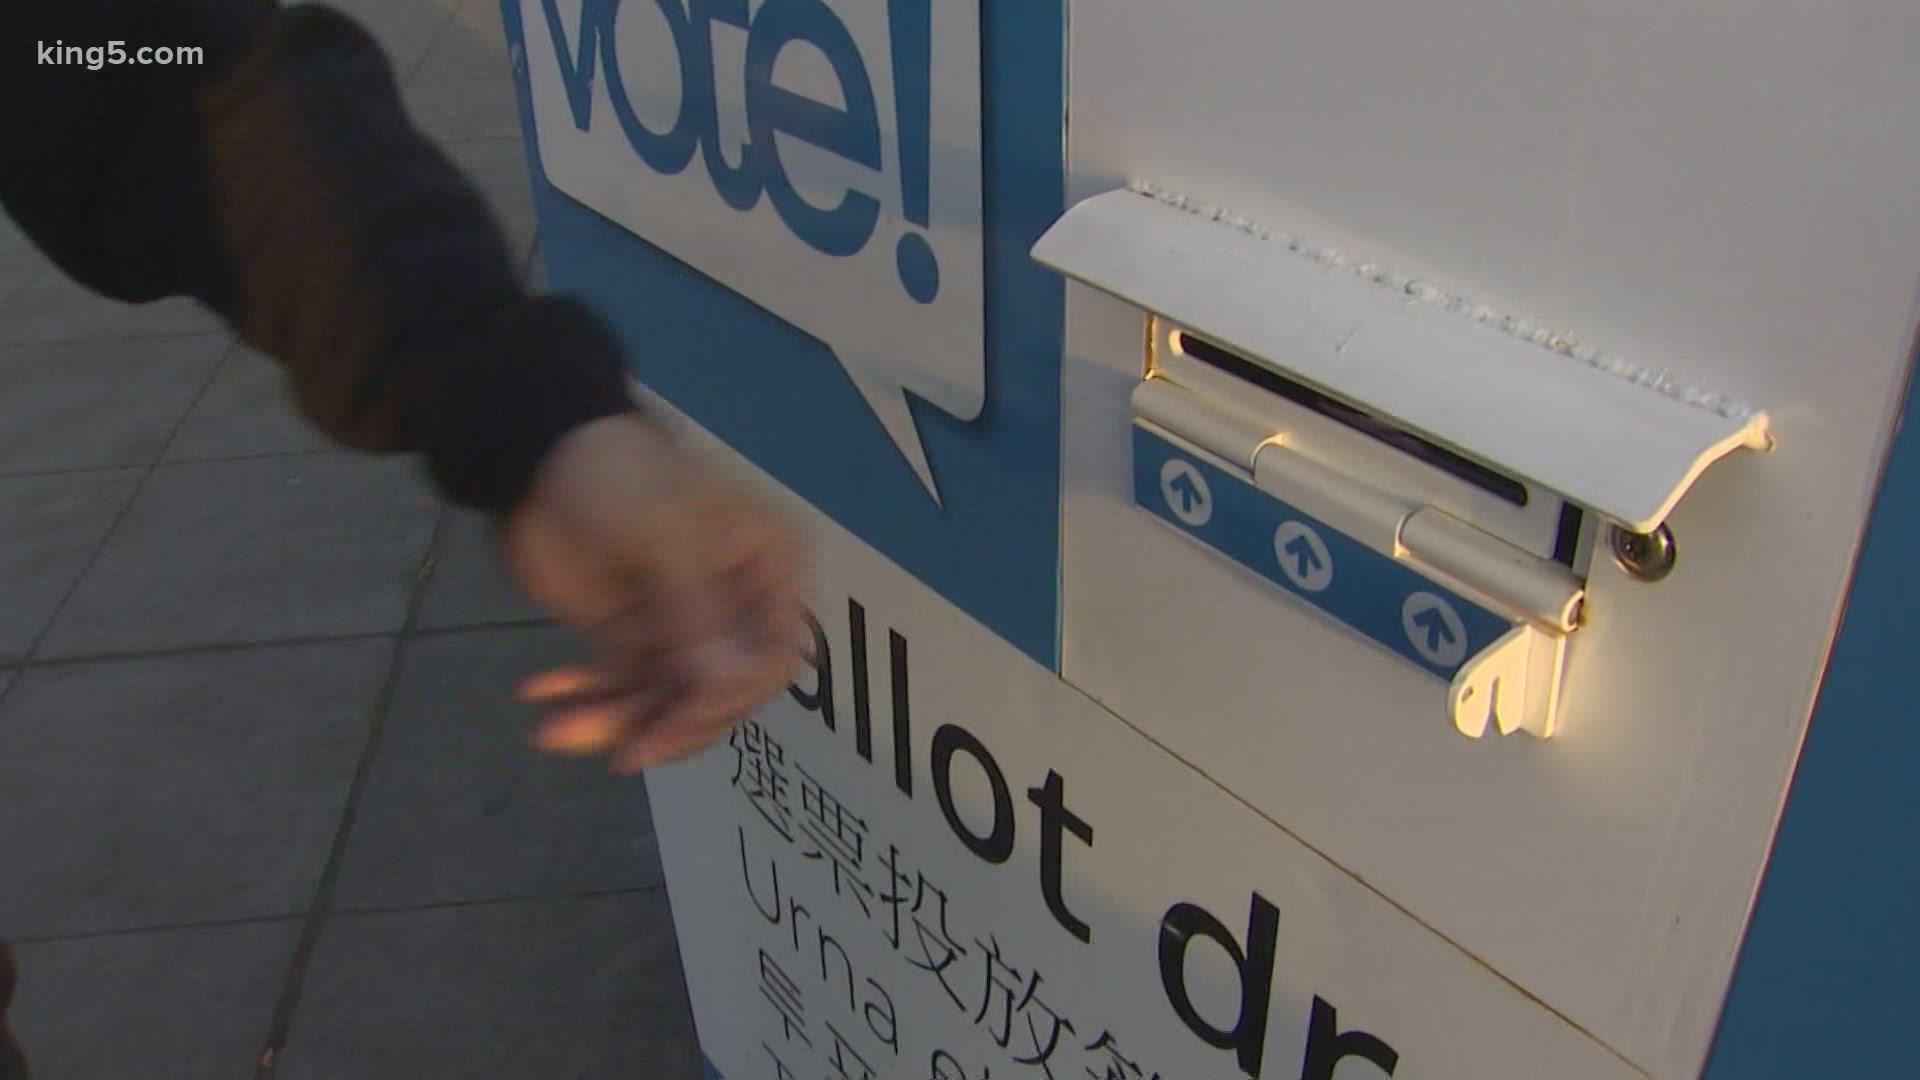 Monday is the last day to register to vote via mail or online in Washington state.